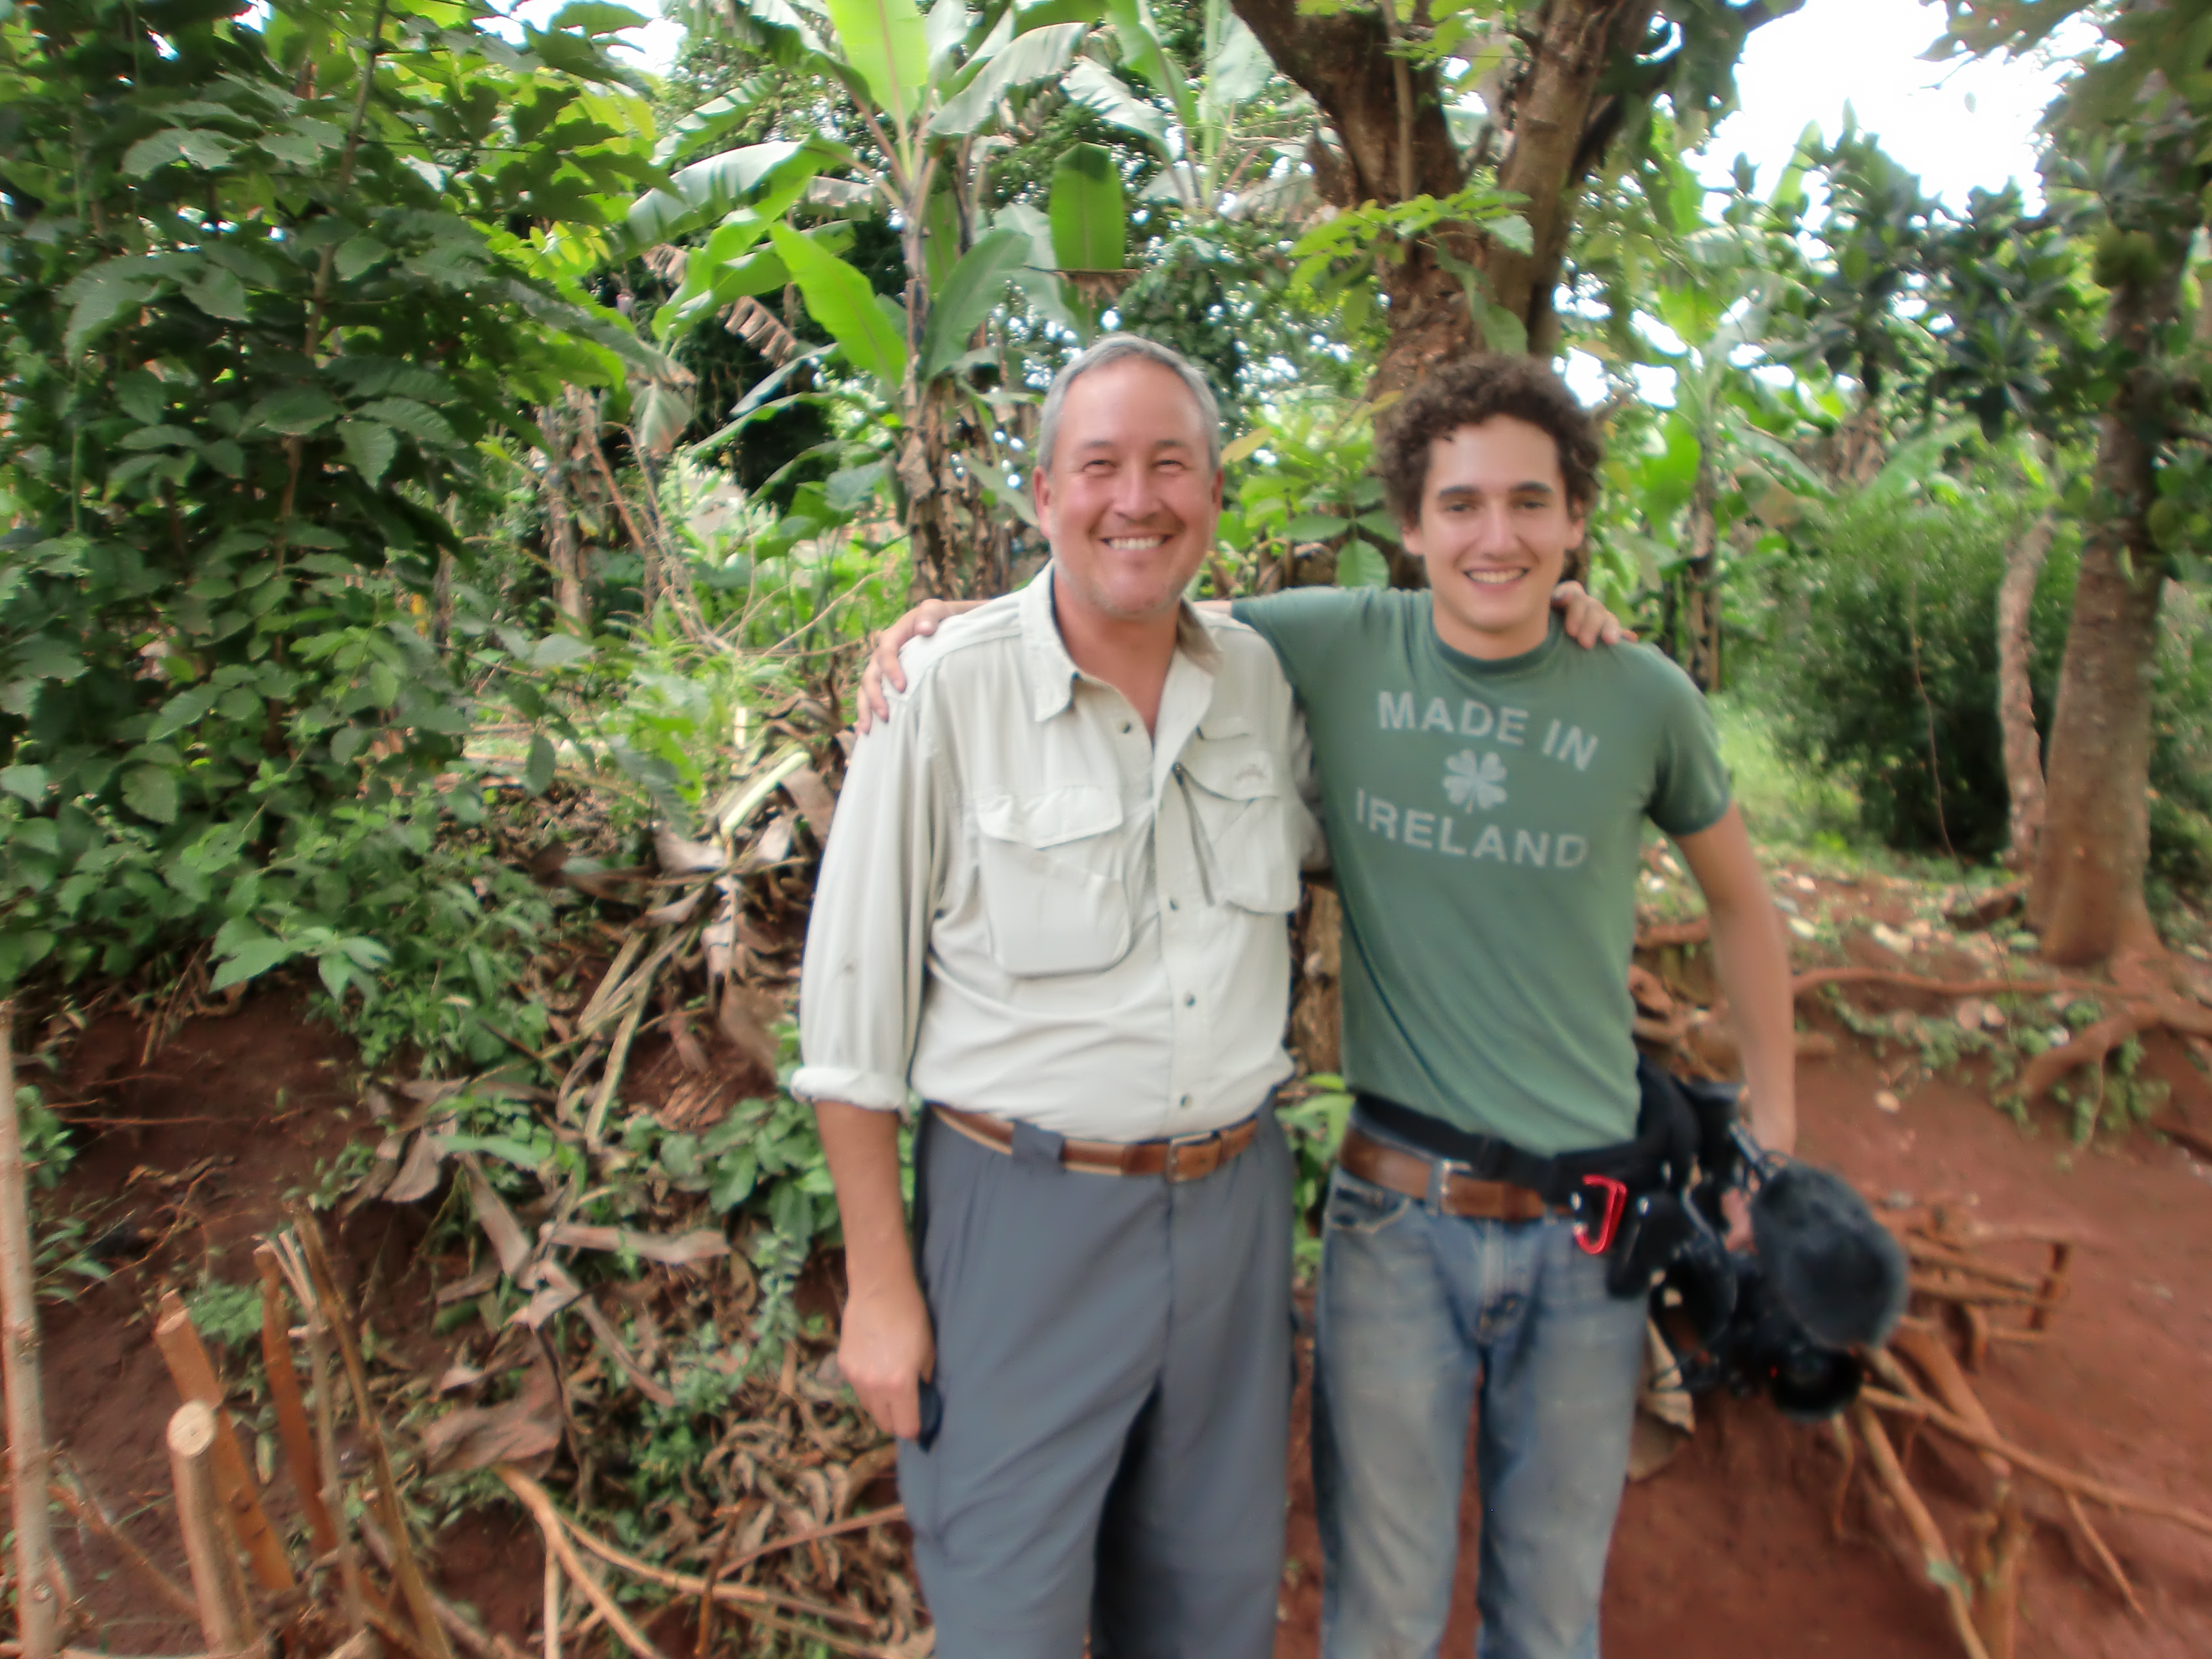 Mike Wargo (director) with Jake Griswold (camera and sound) on location in Uganda.